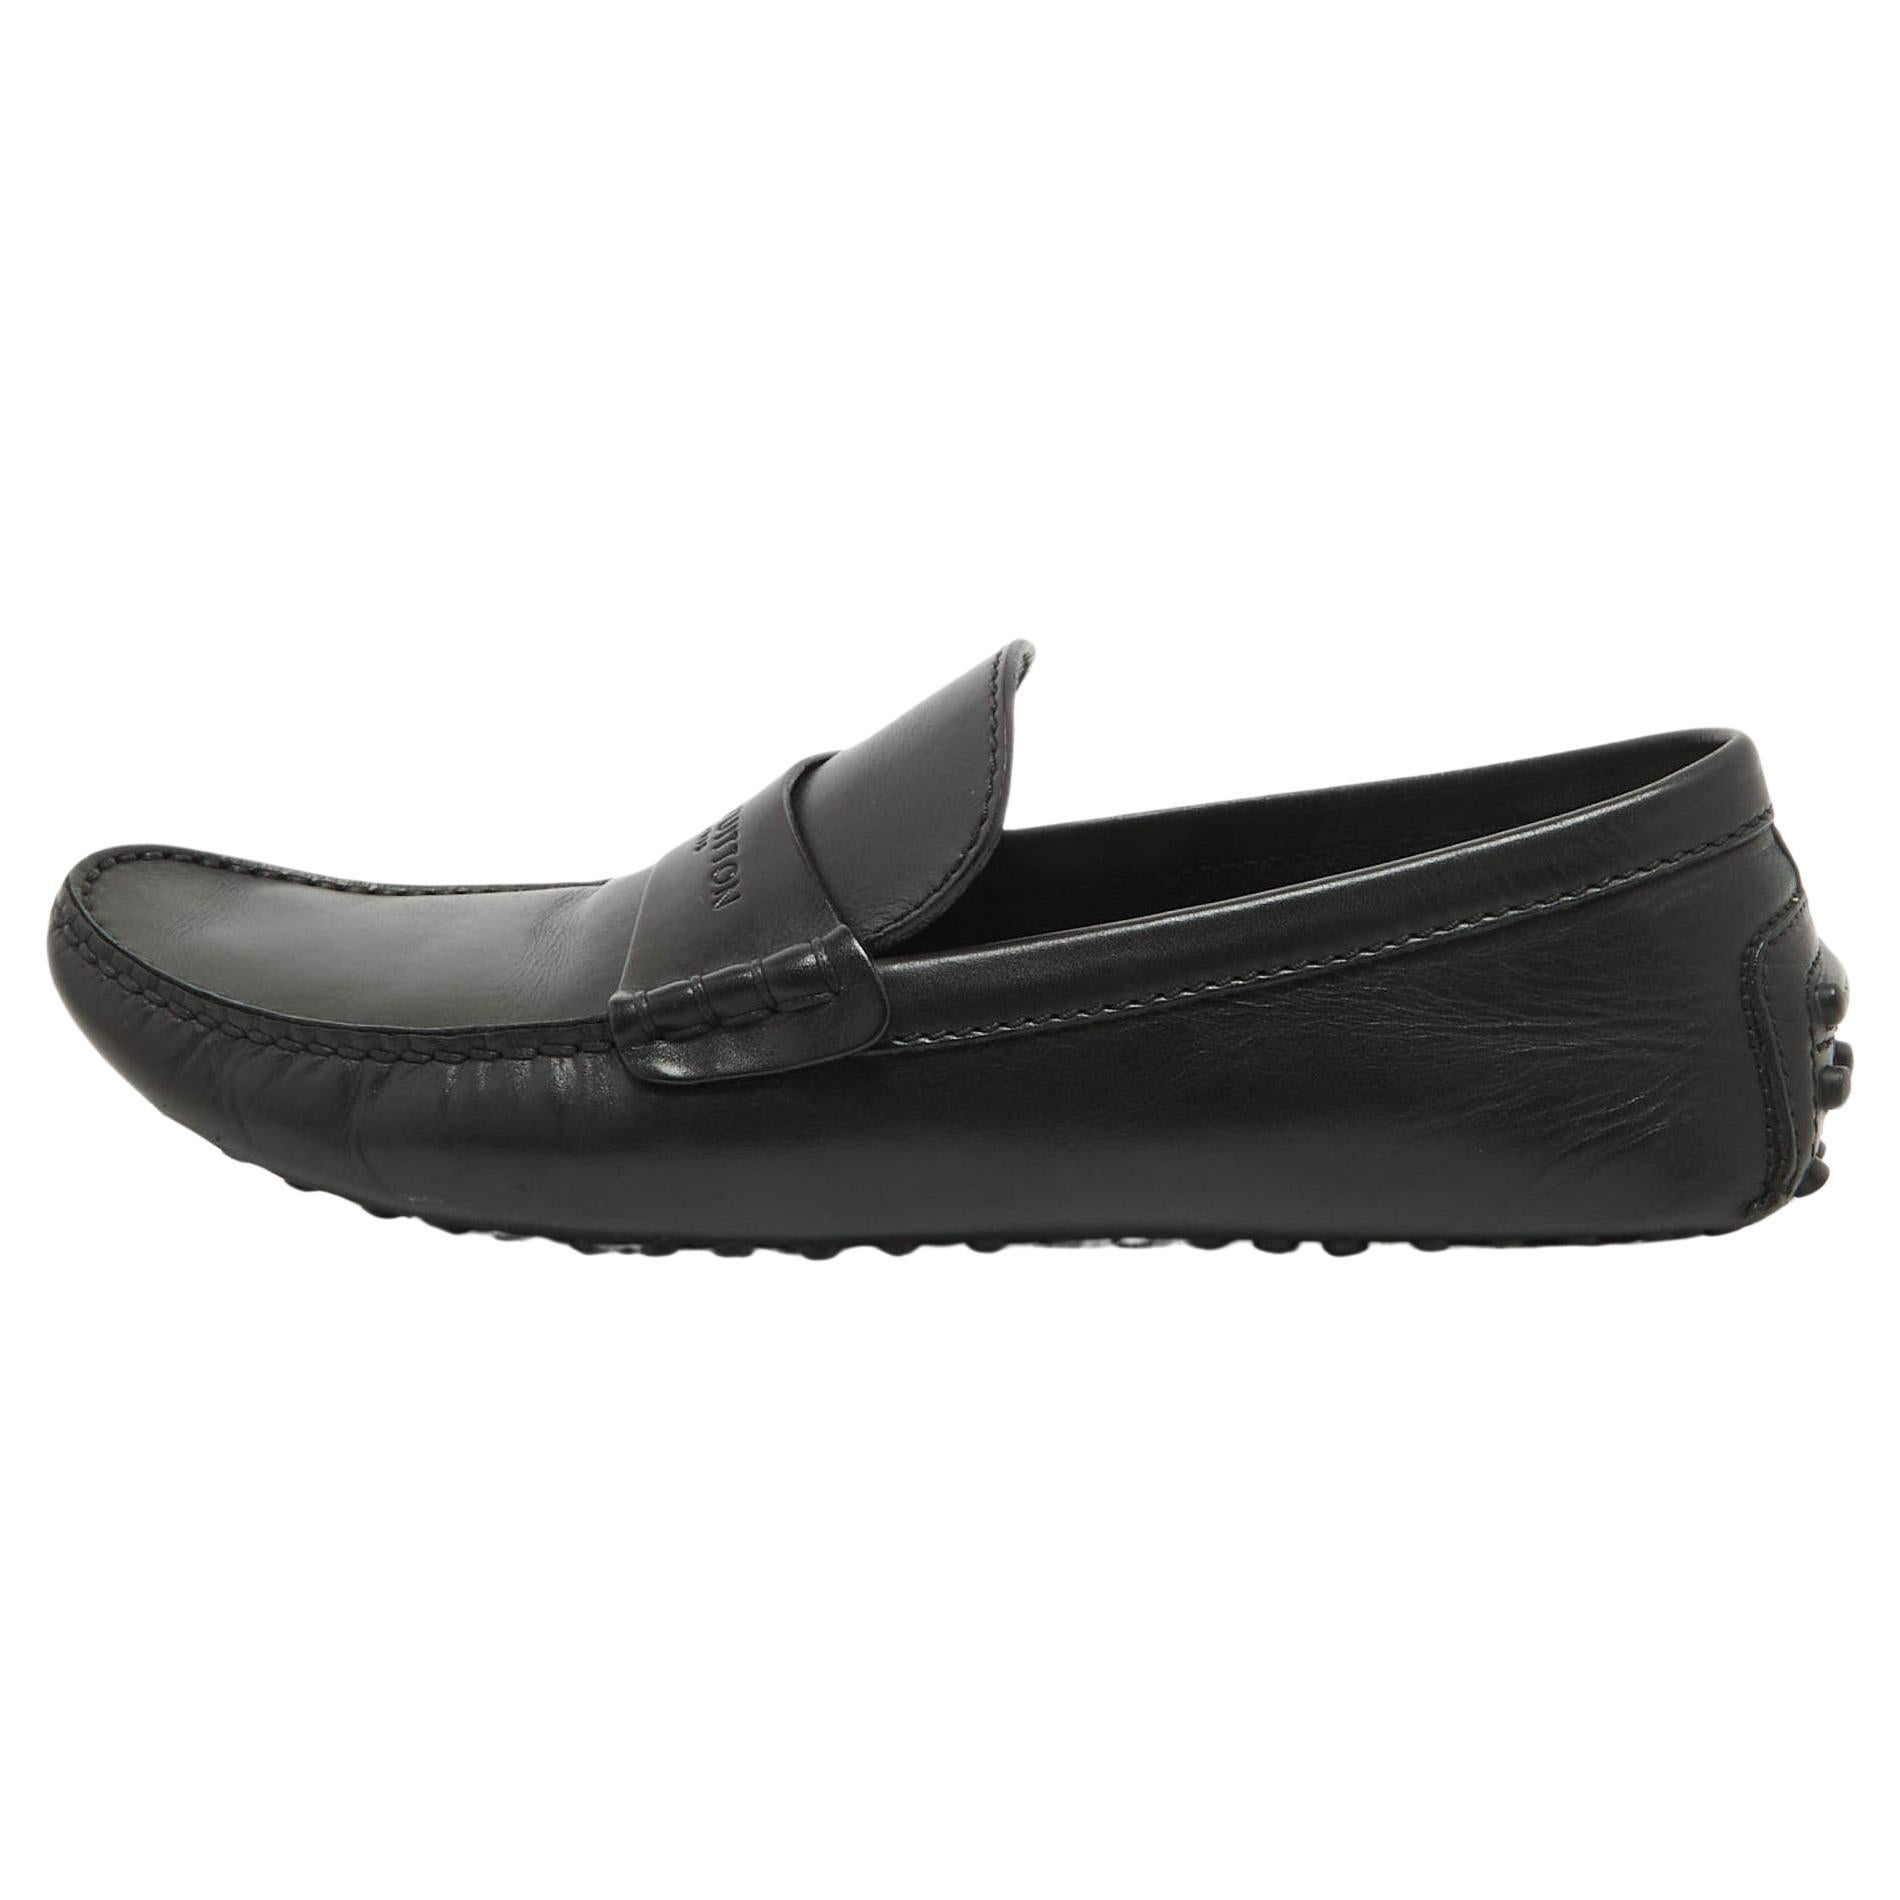 Louis Vuitton Black Leather Slip On Loafers Size 42.5 For Sale